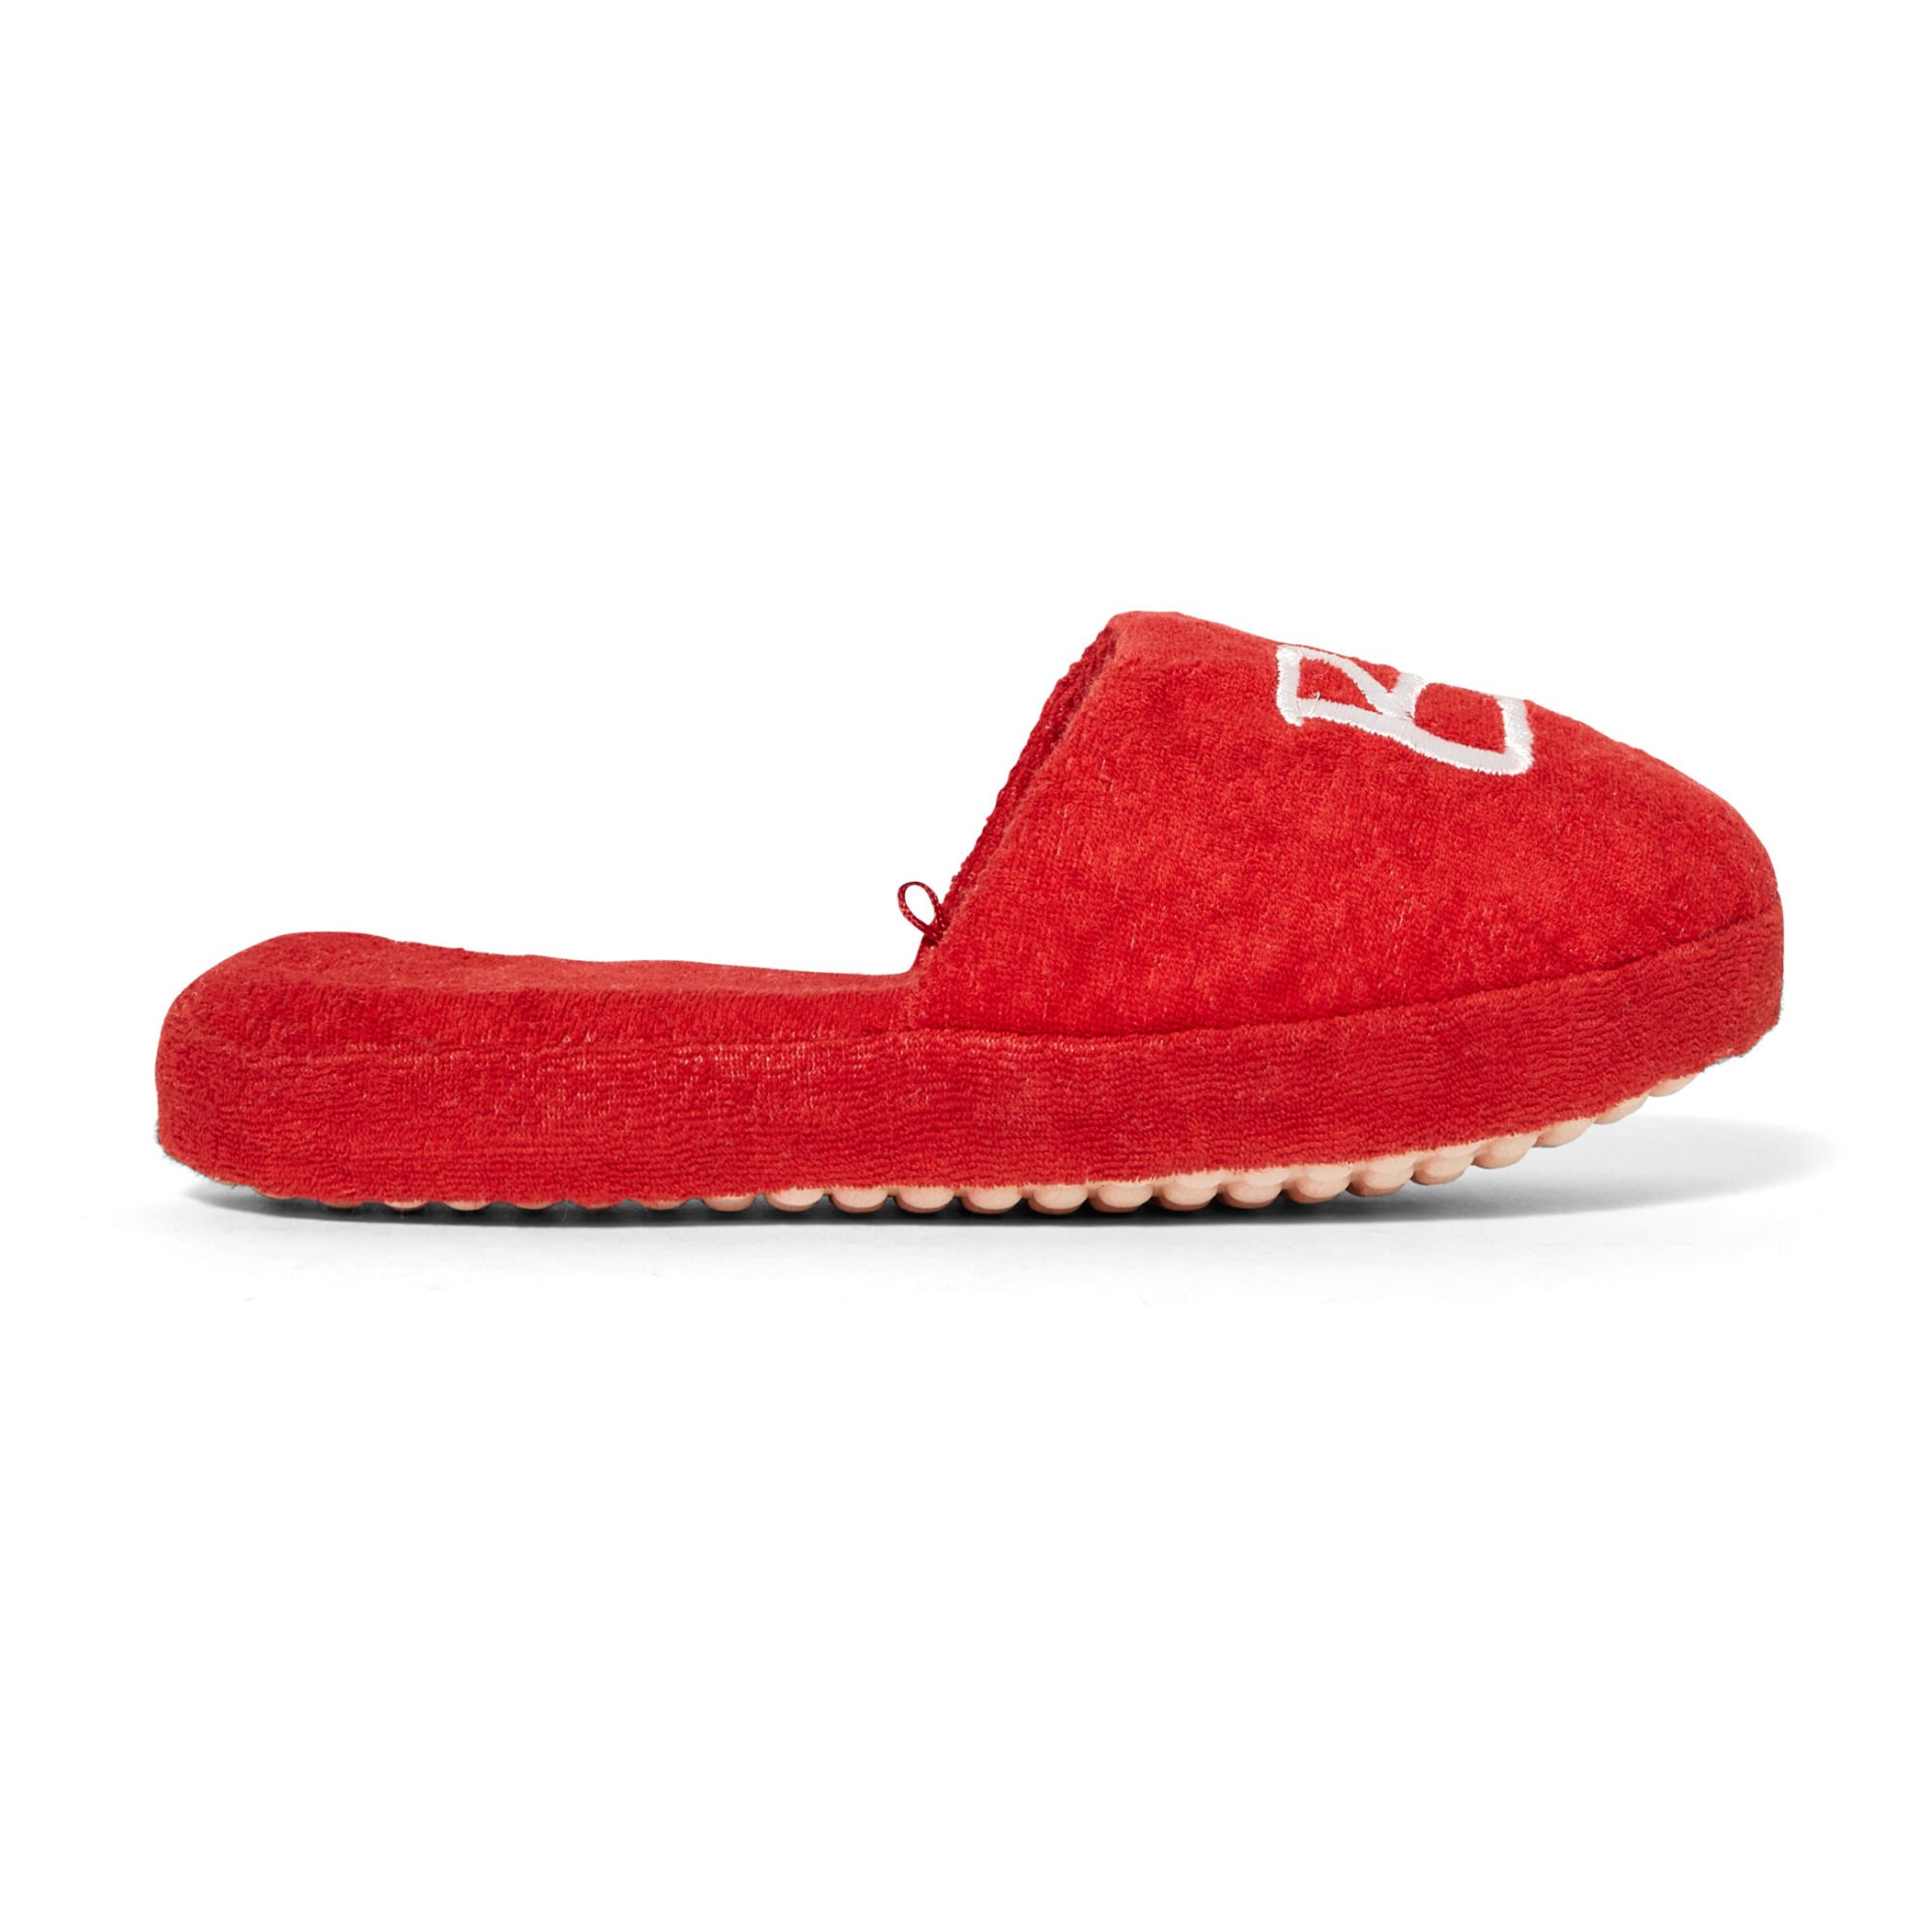 Mathilde Cabanas - Chaussons Bisou - Collection Adulte - Femme - Rouge